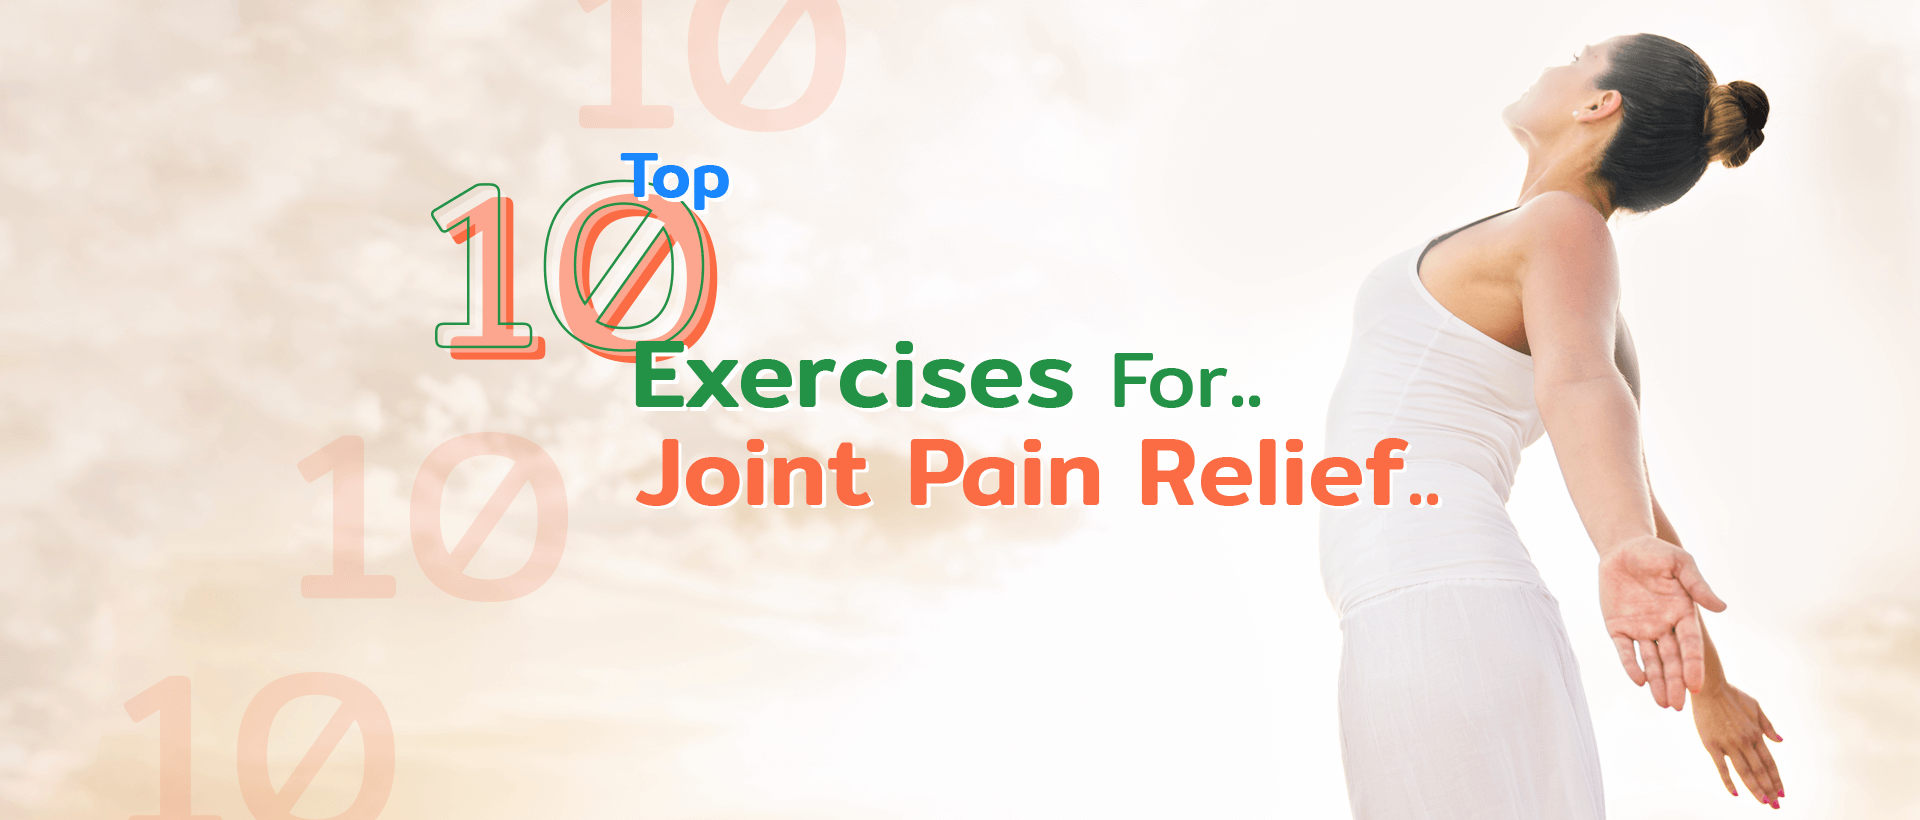 Top 10 exercises for joint pain relief